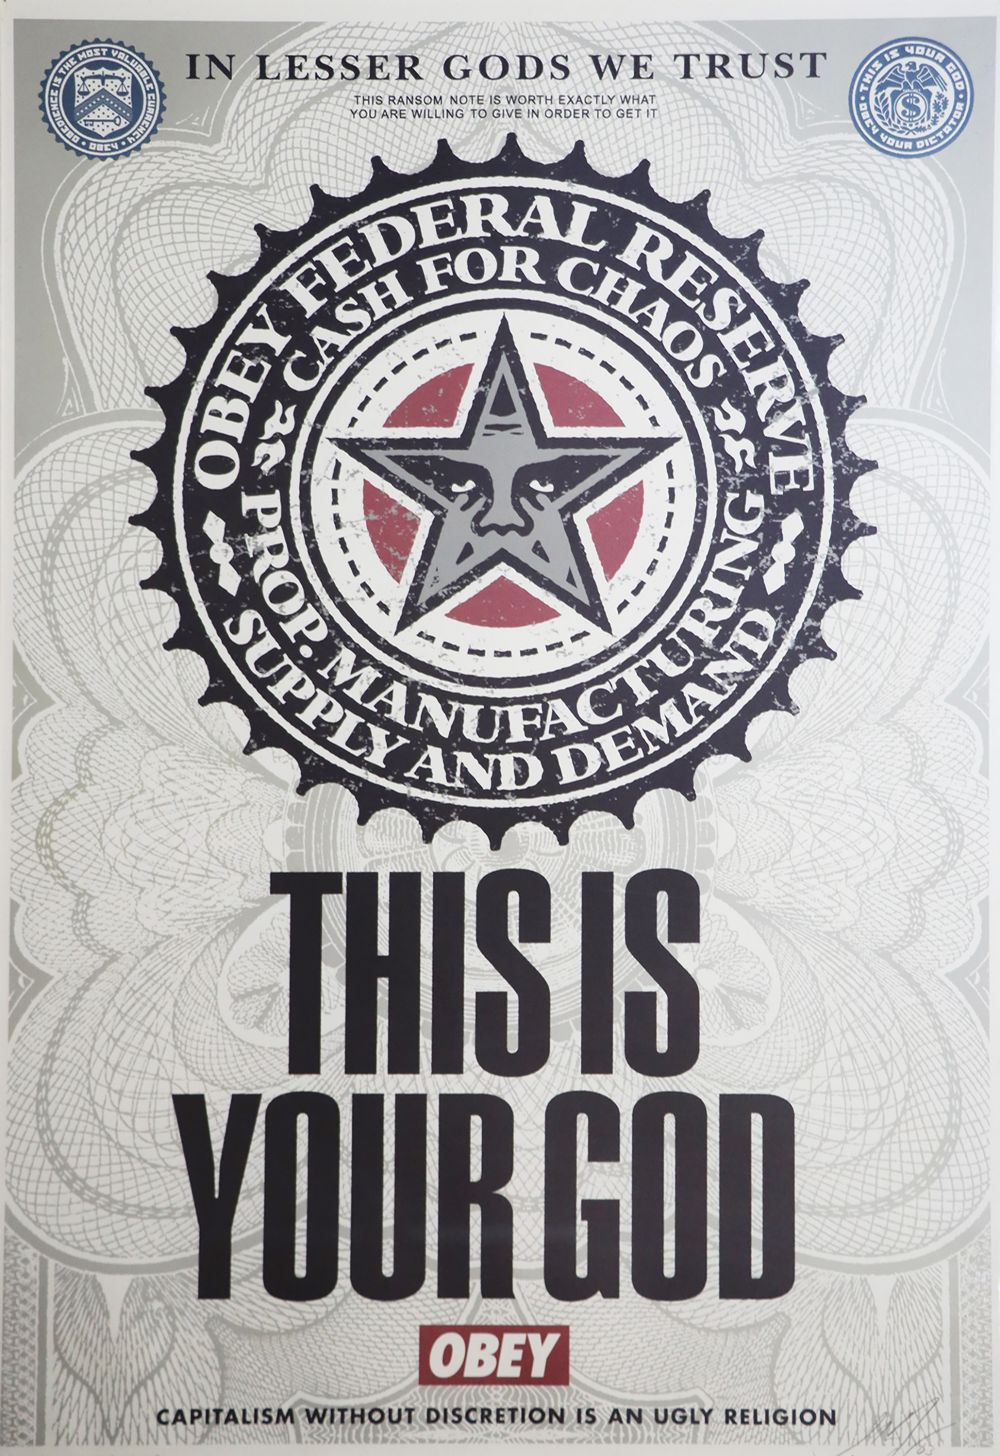 OBEY - THIS IS YOUR GOD by Shepard Fairey  at deVeres Auctions